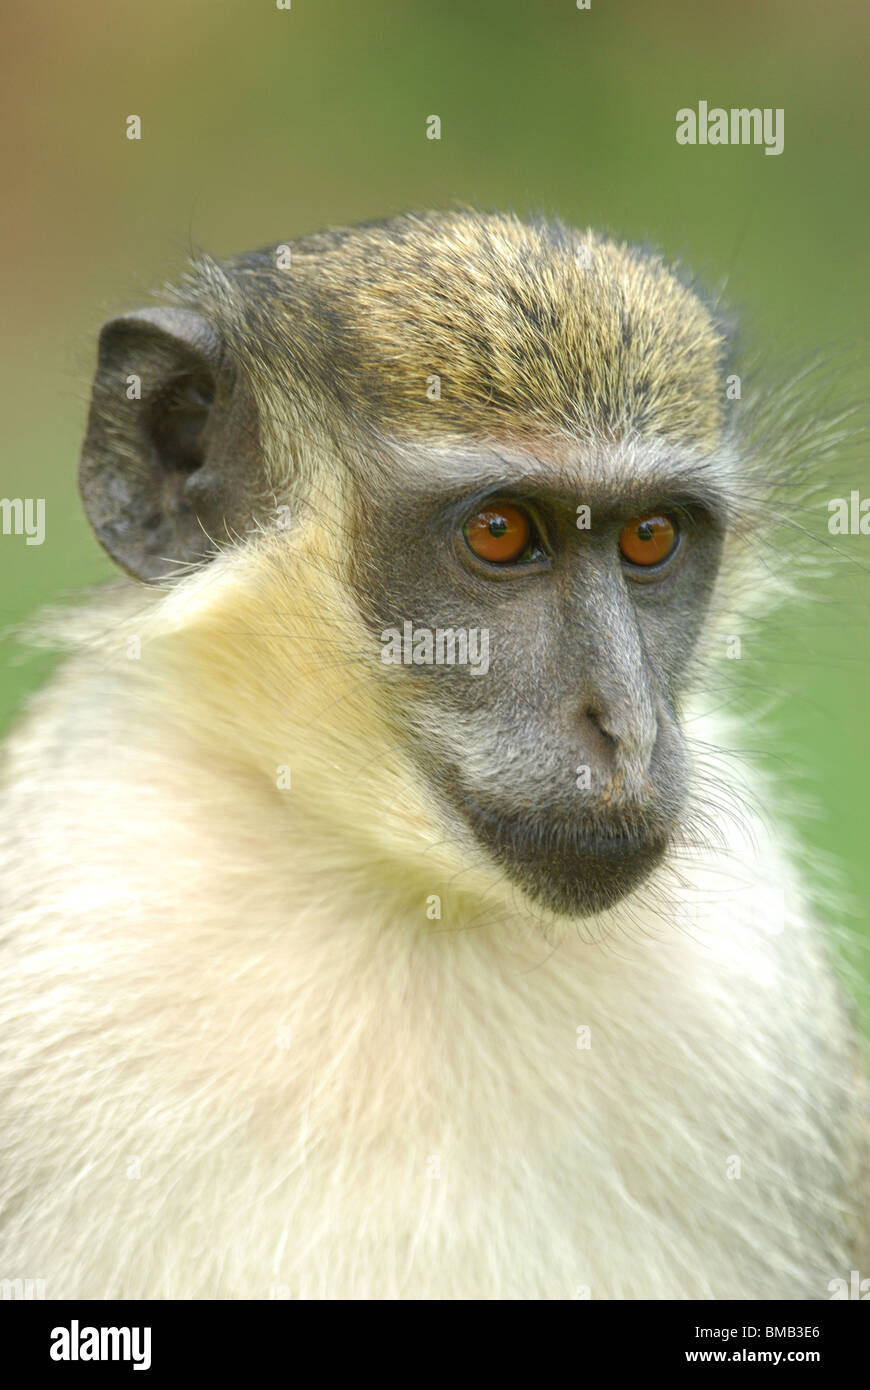 Green Vervet Monkey (Chlorocebus sabaeus) in The Gambia, western Africa. April 2009. Stock Photo